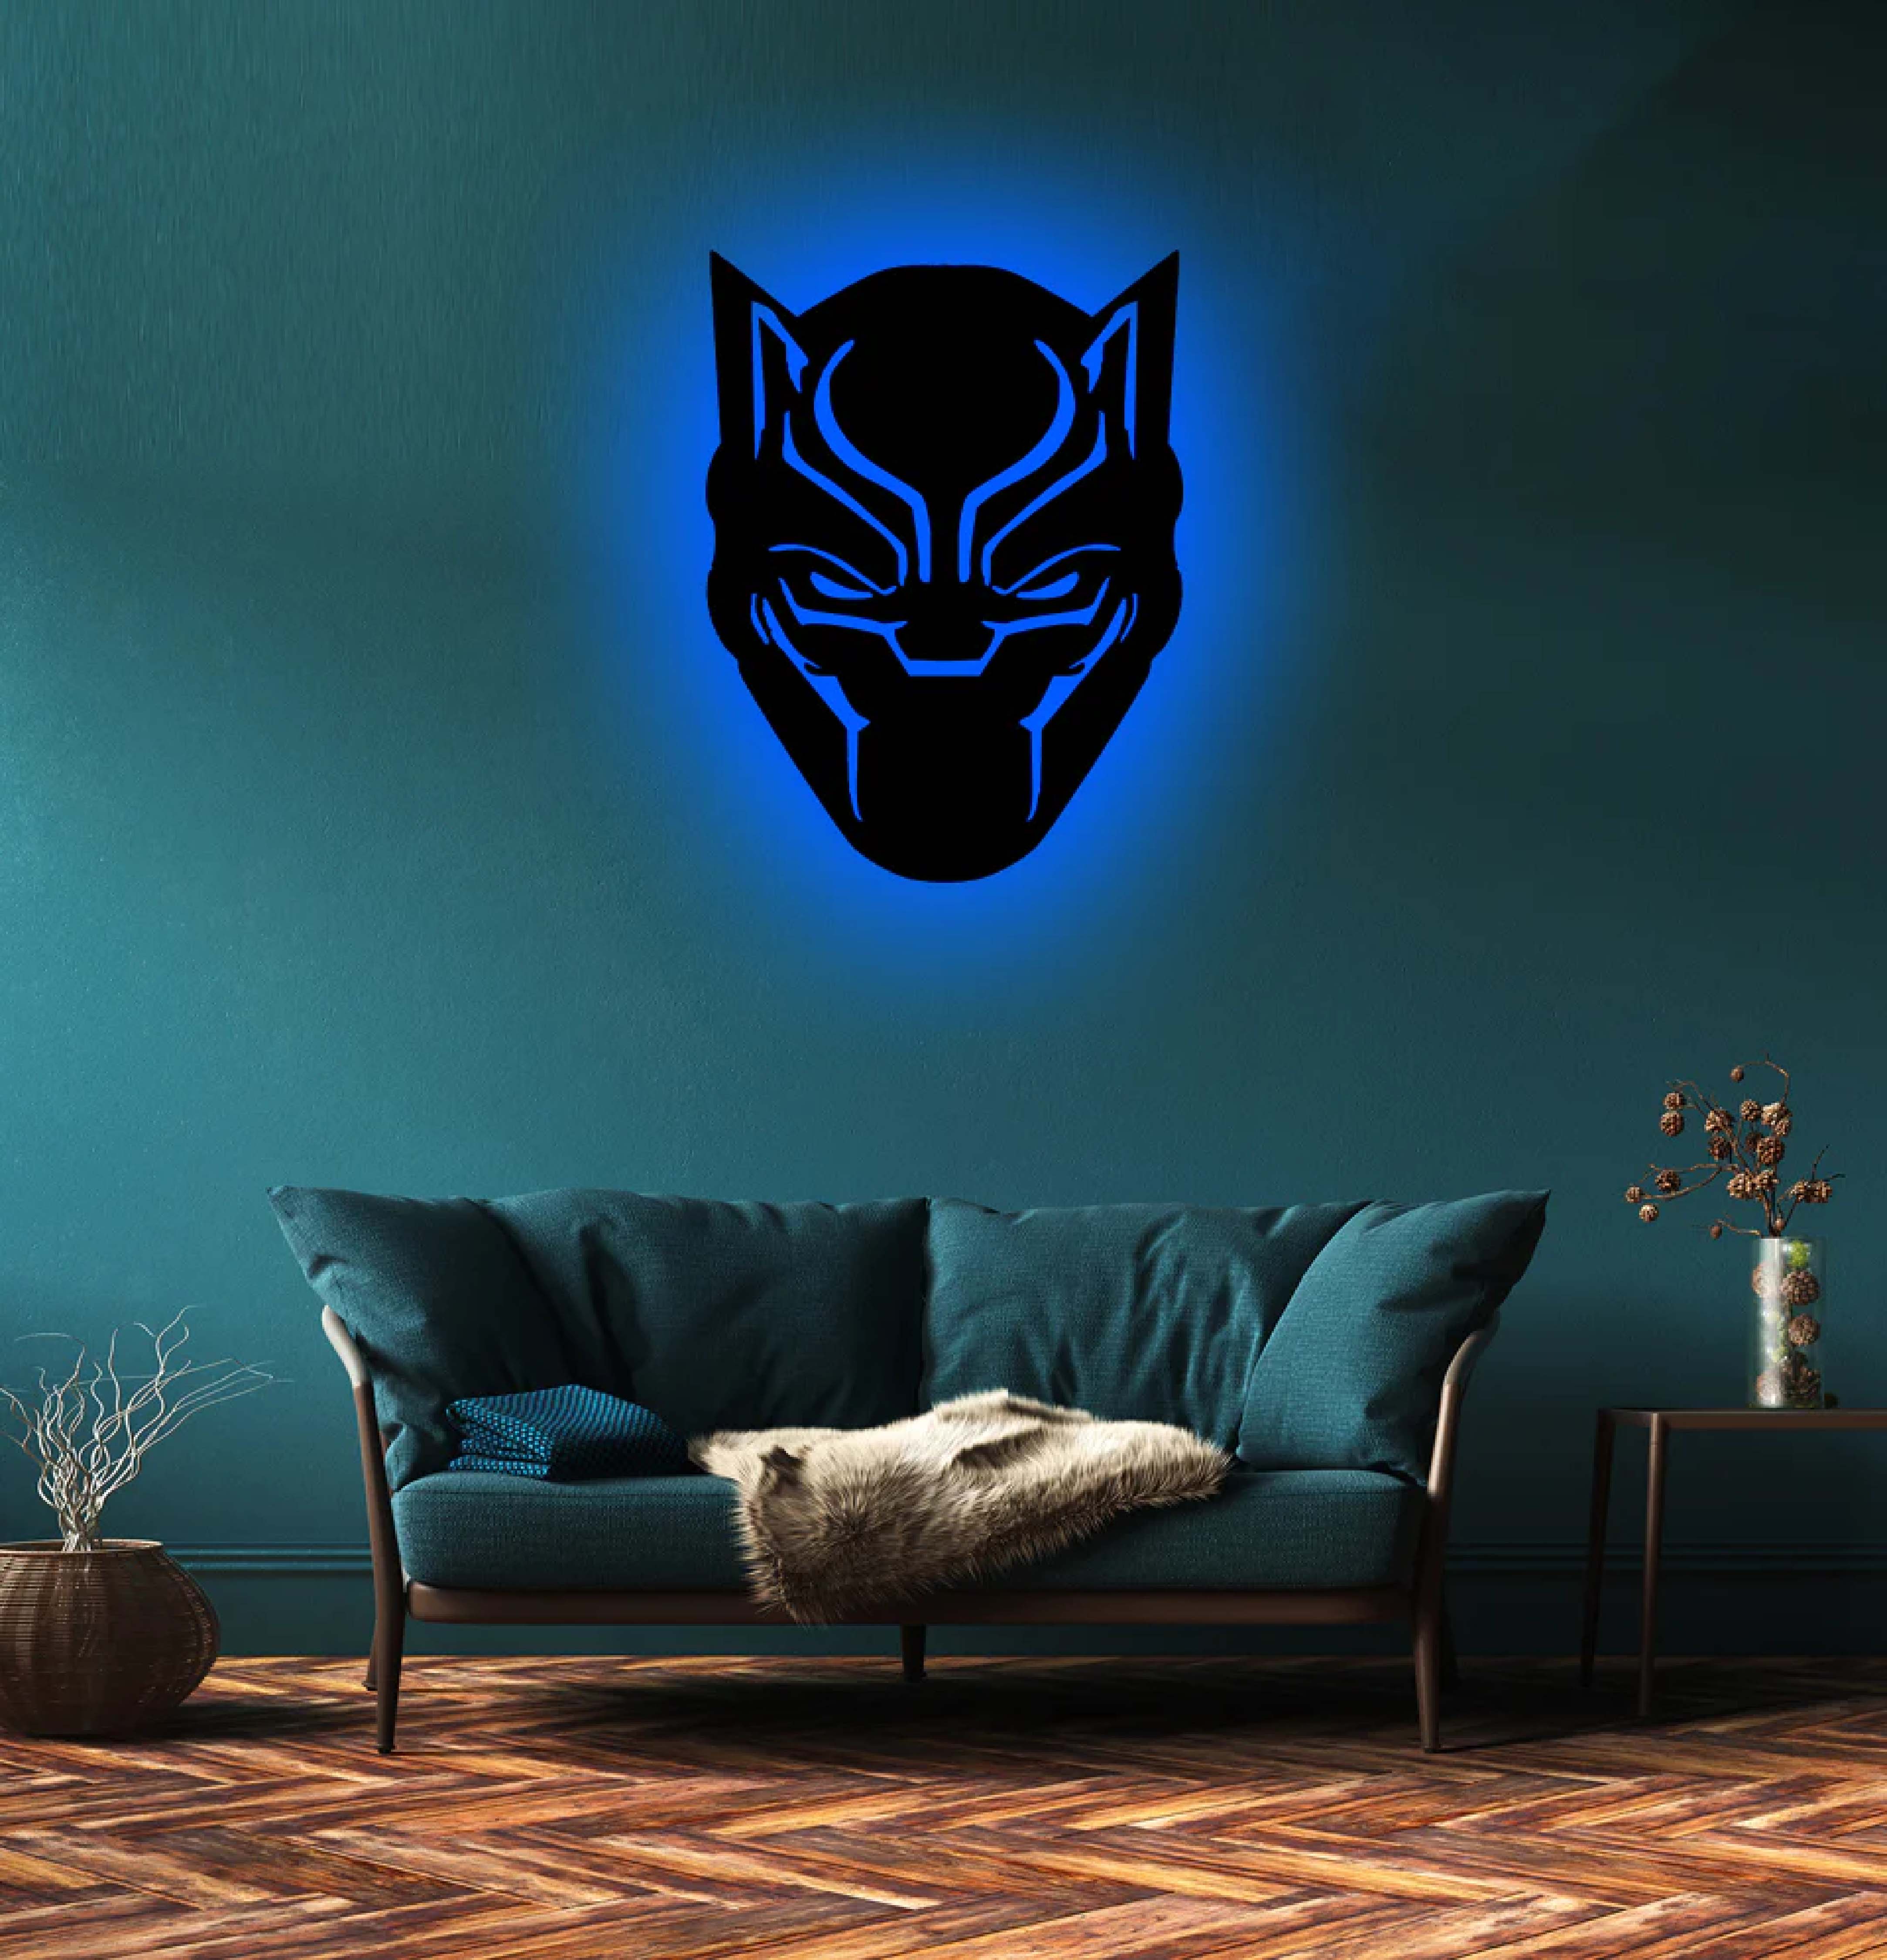 POSTERNEST Black Panther Black Panther Marvel Poster Matte Finish Paper  Print Unframed 12 x18 Inch (Multicolor) - P891 : Amazon.in: Home & Kitchen